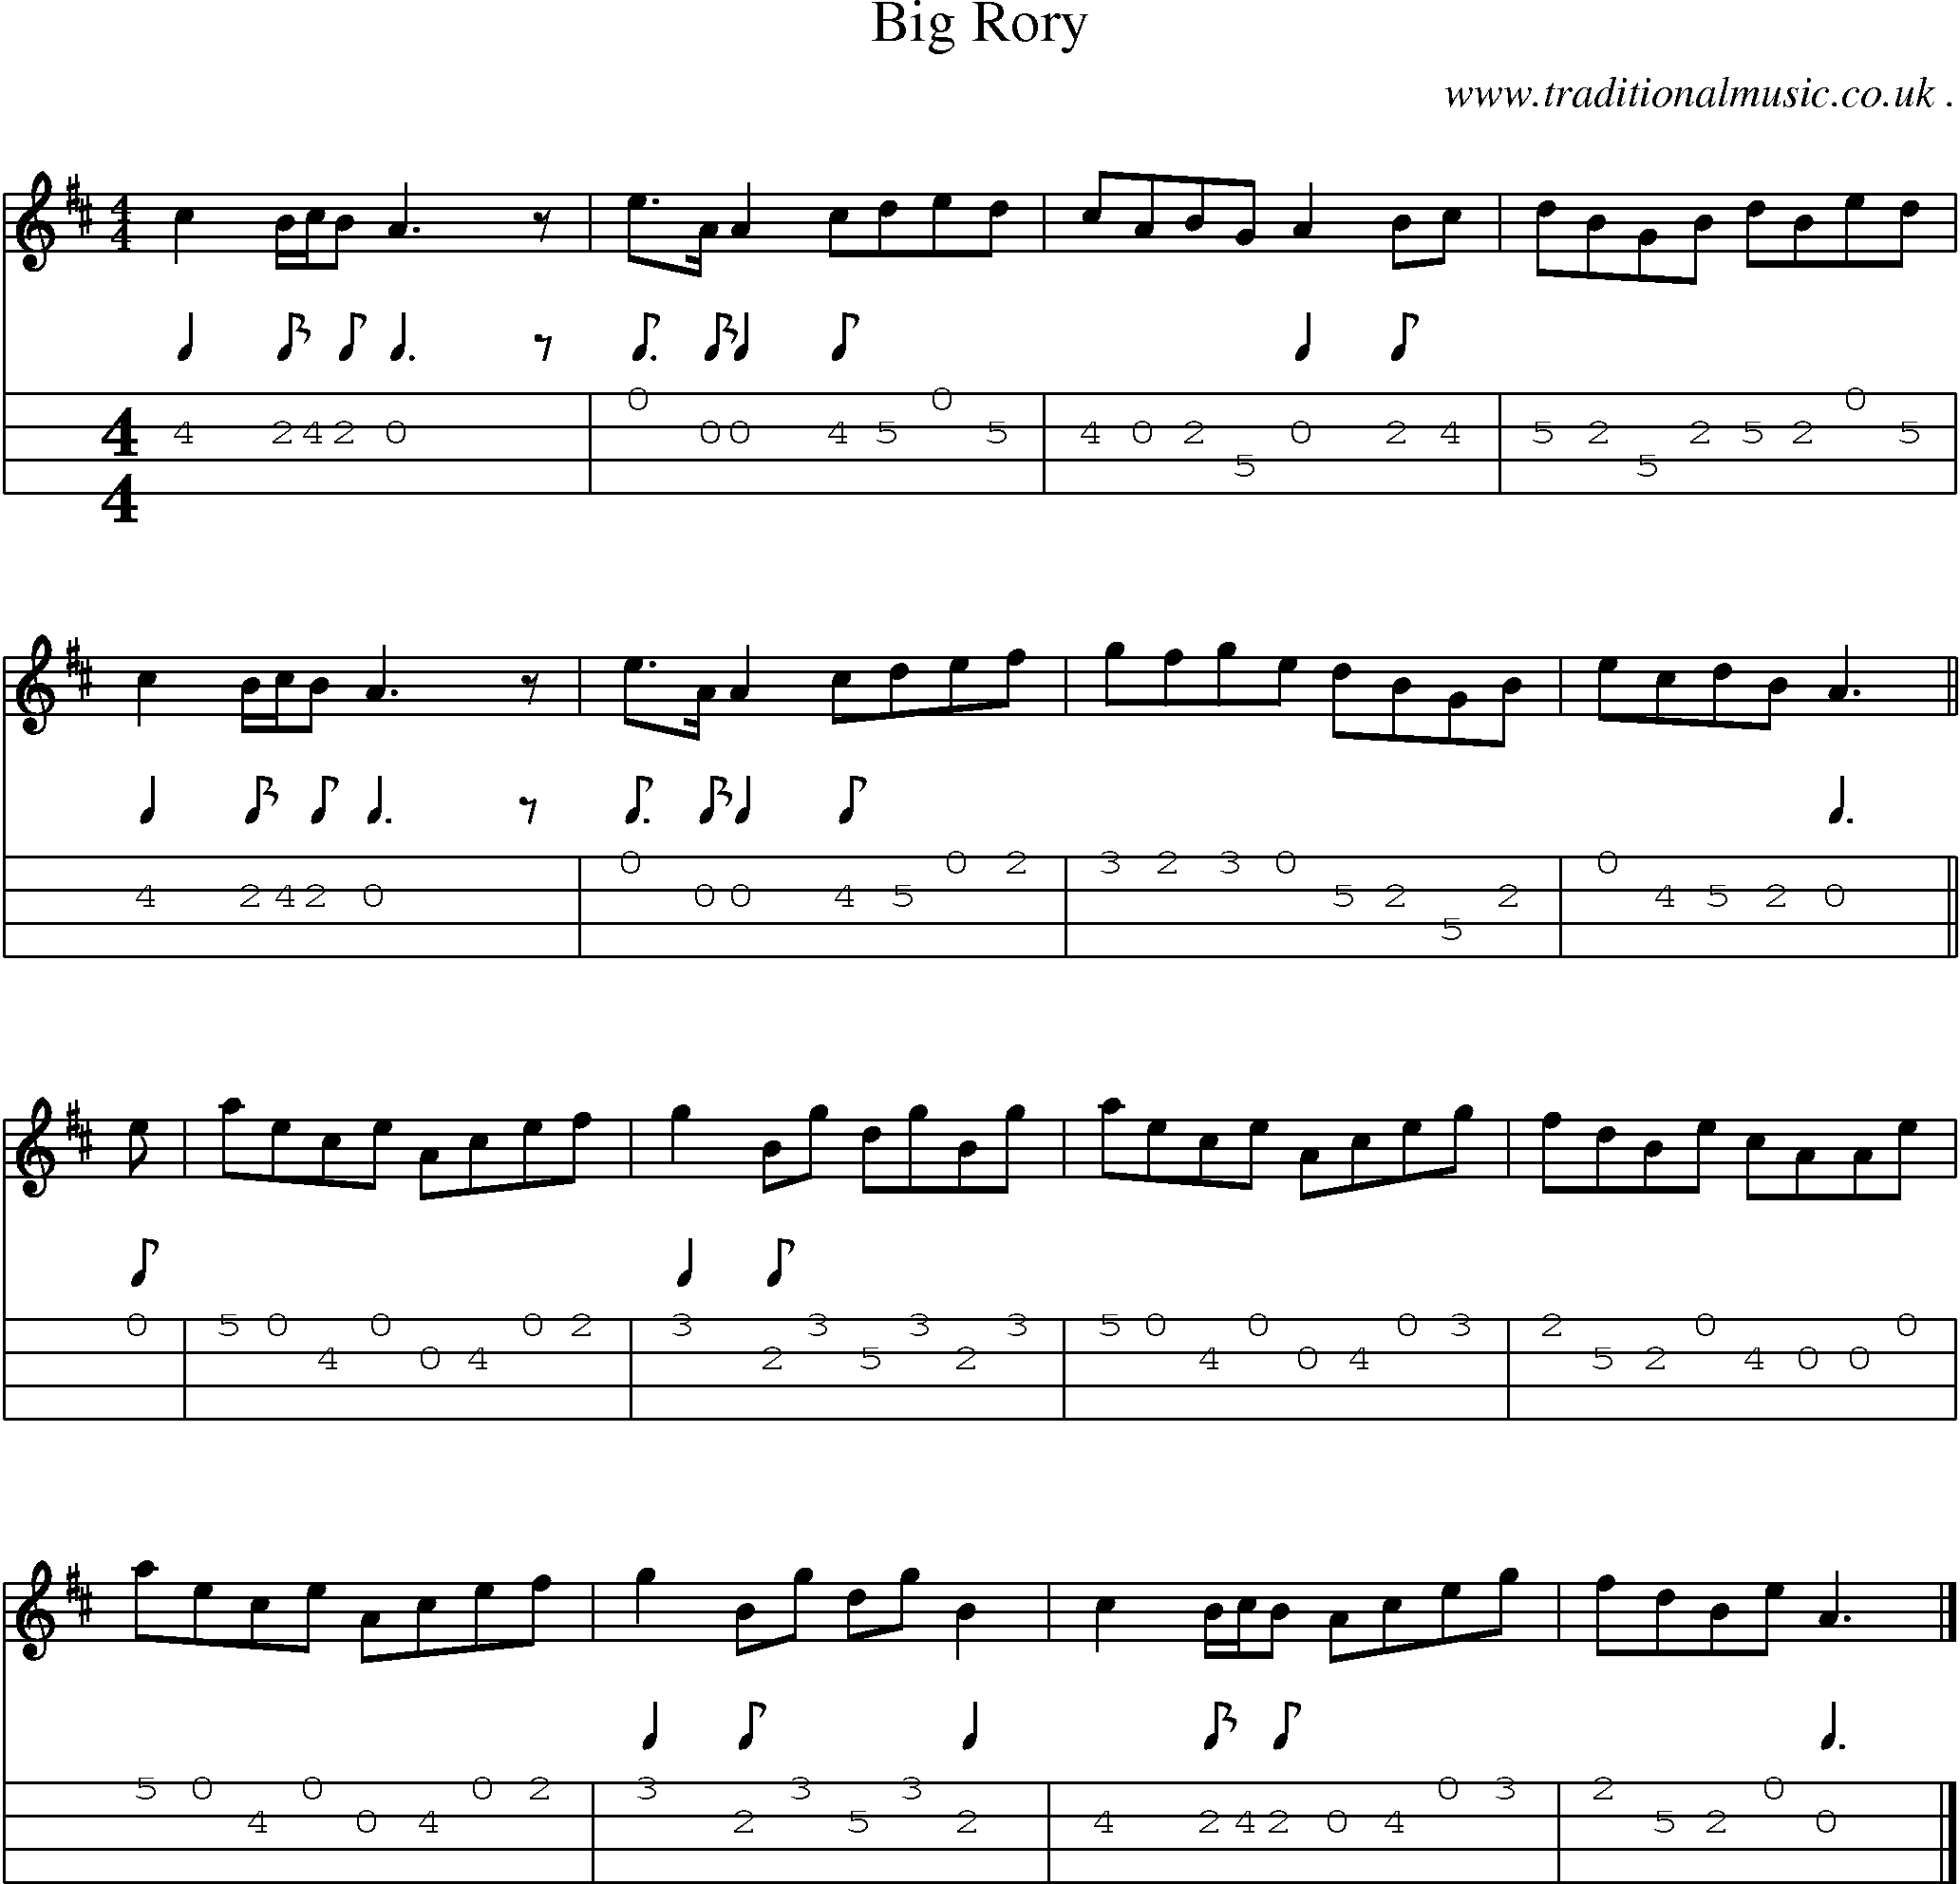 Sheet-music  score, Chords and Mandolin Tabs for Big Rory